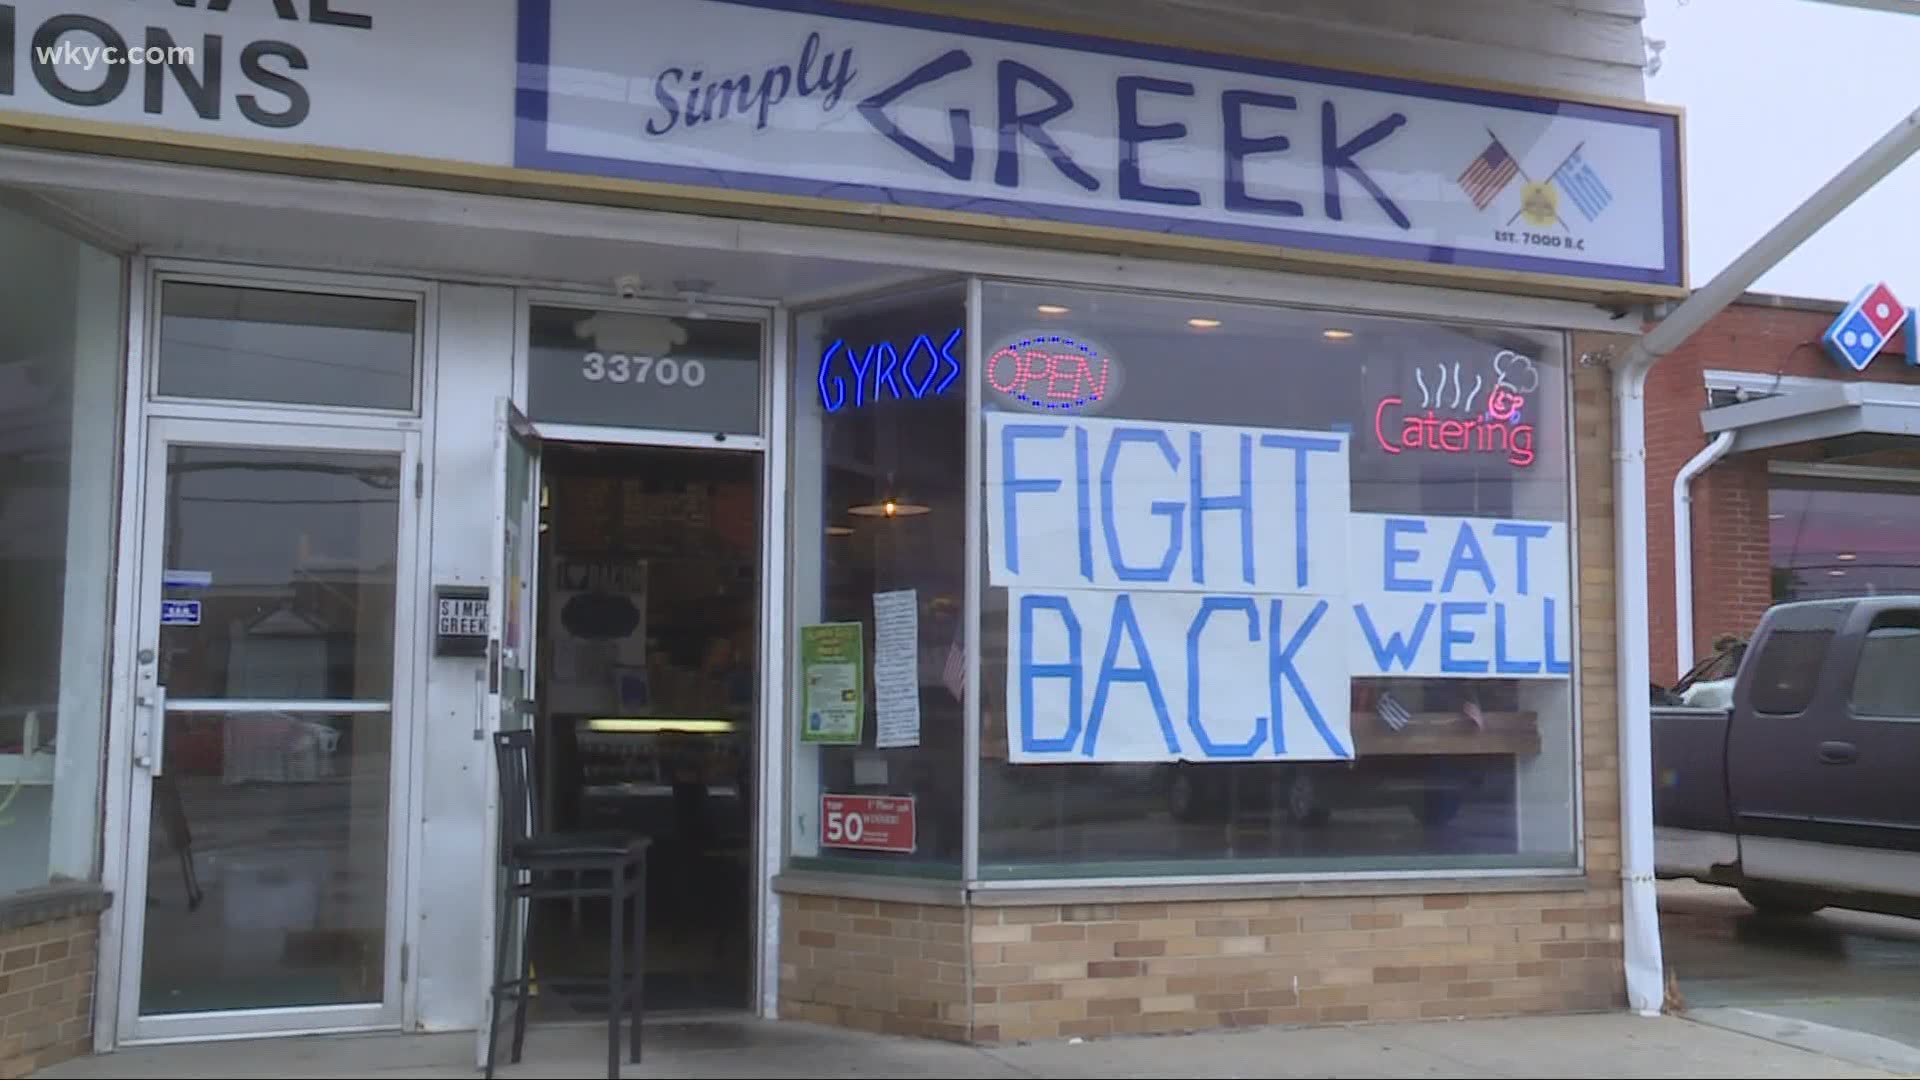 The workers at Simply Greek are apparently not wearing masks. The owner says he has an exception to the rule.